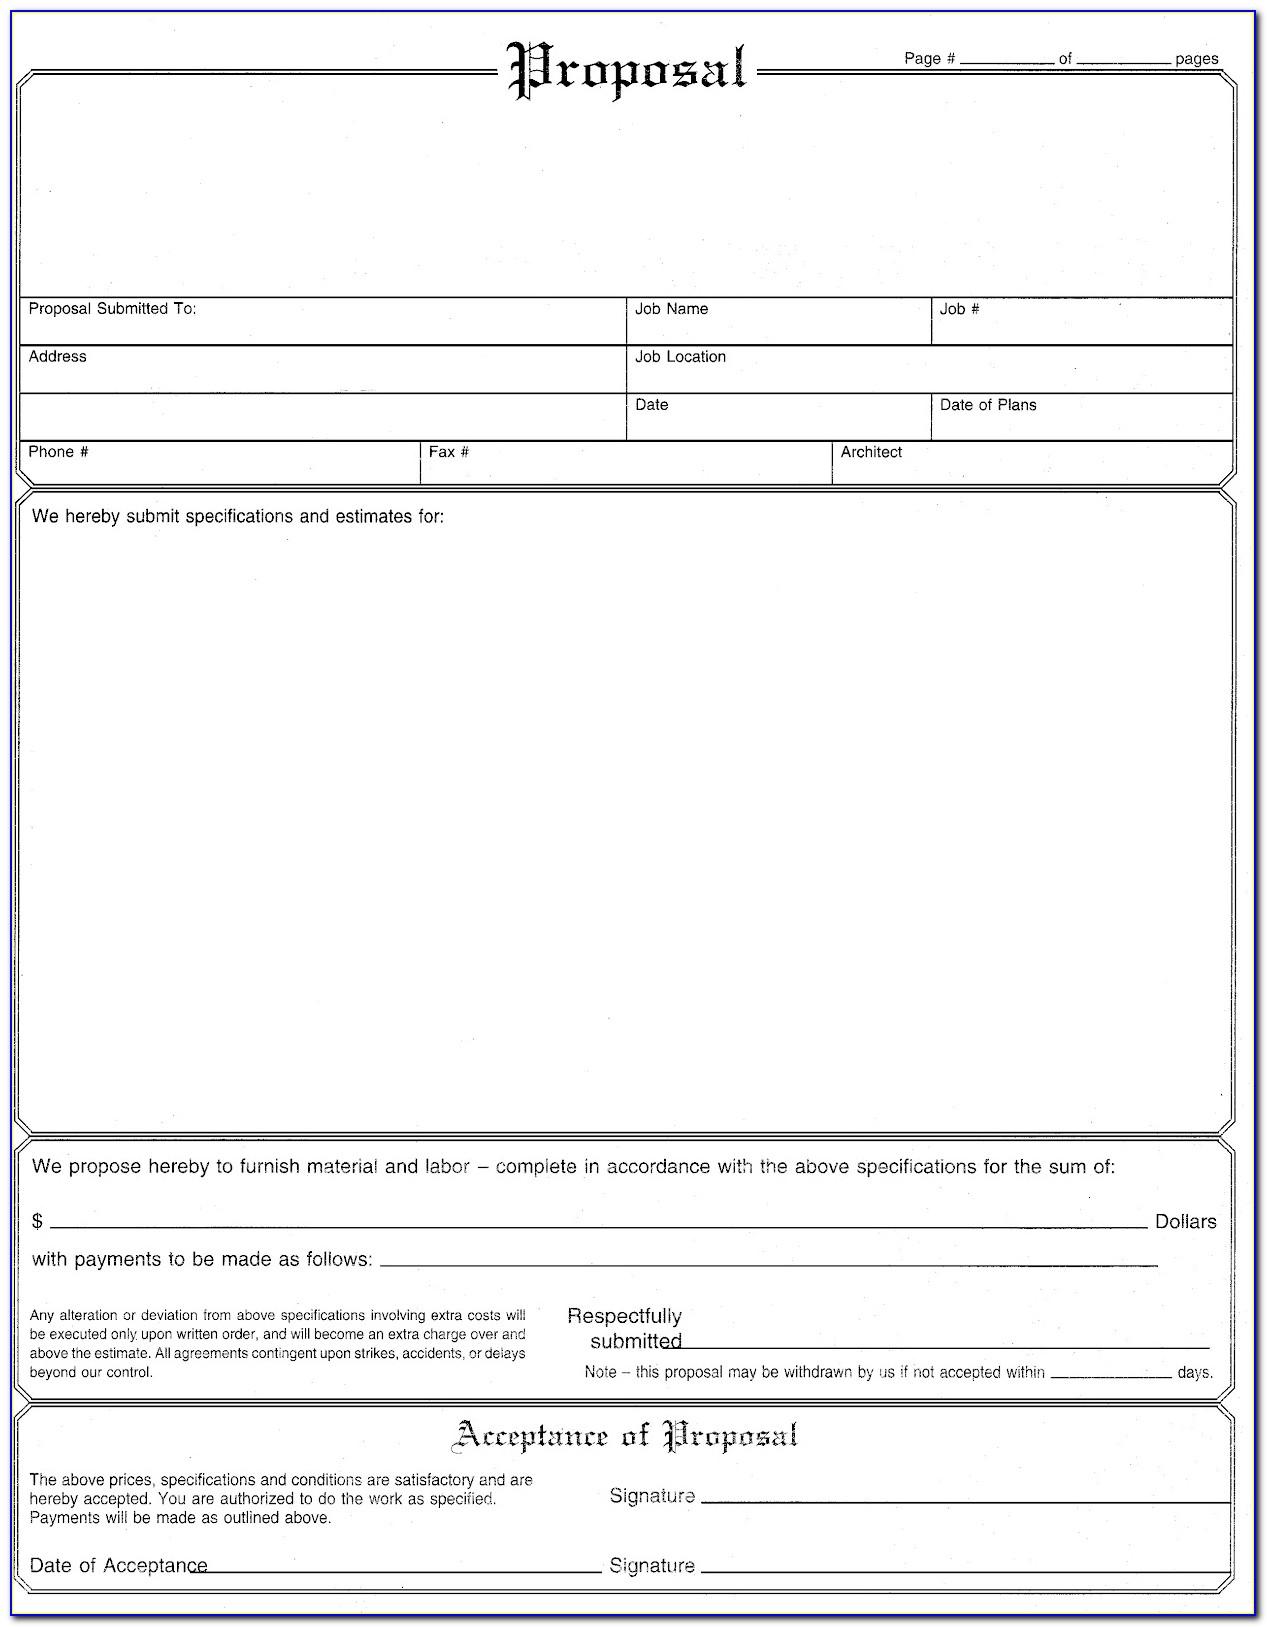 Painting Estimate Proposal Form Free